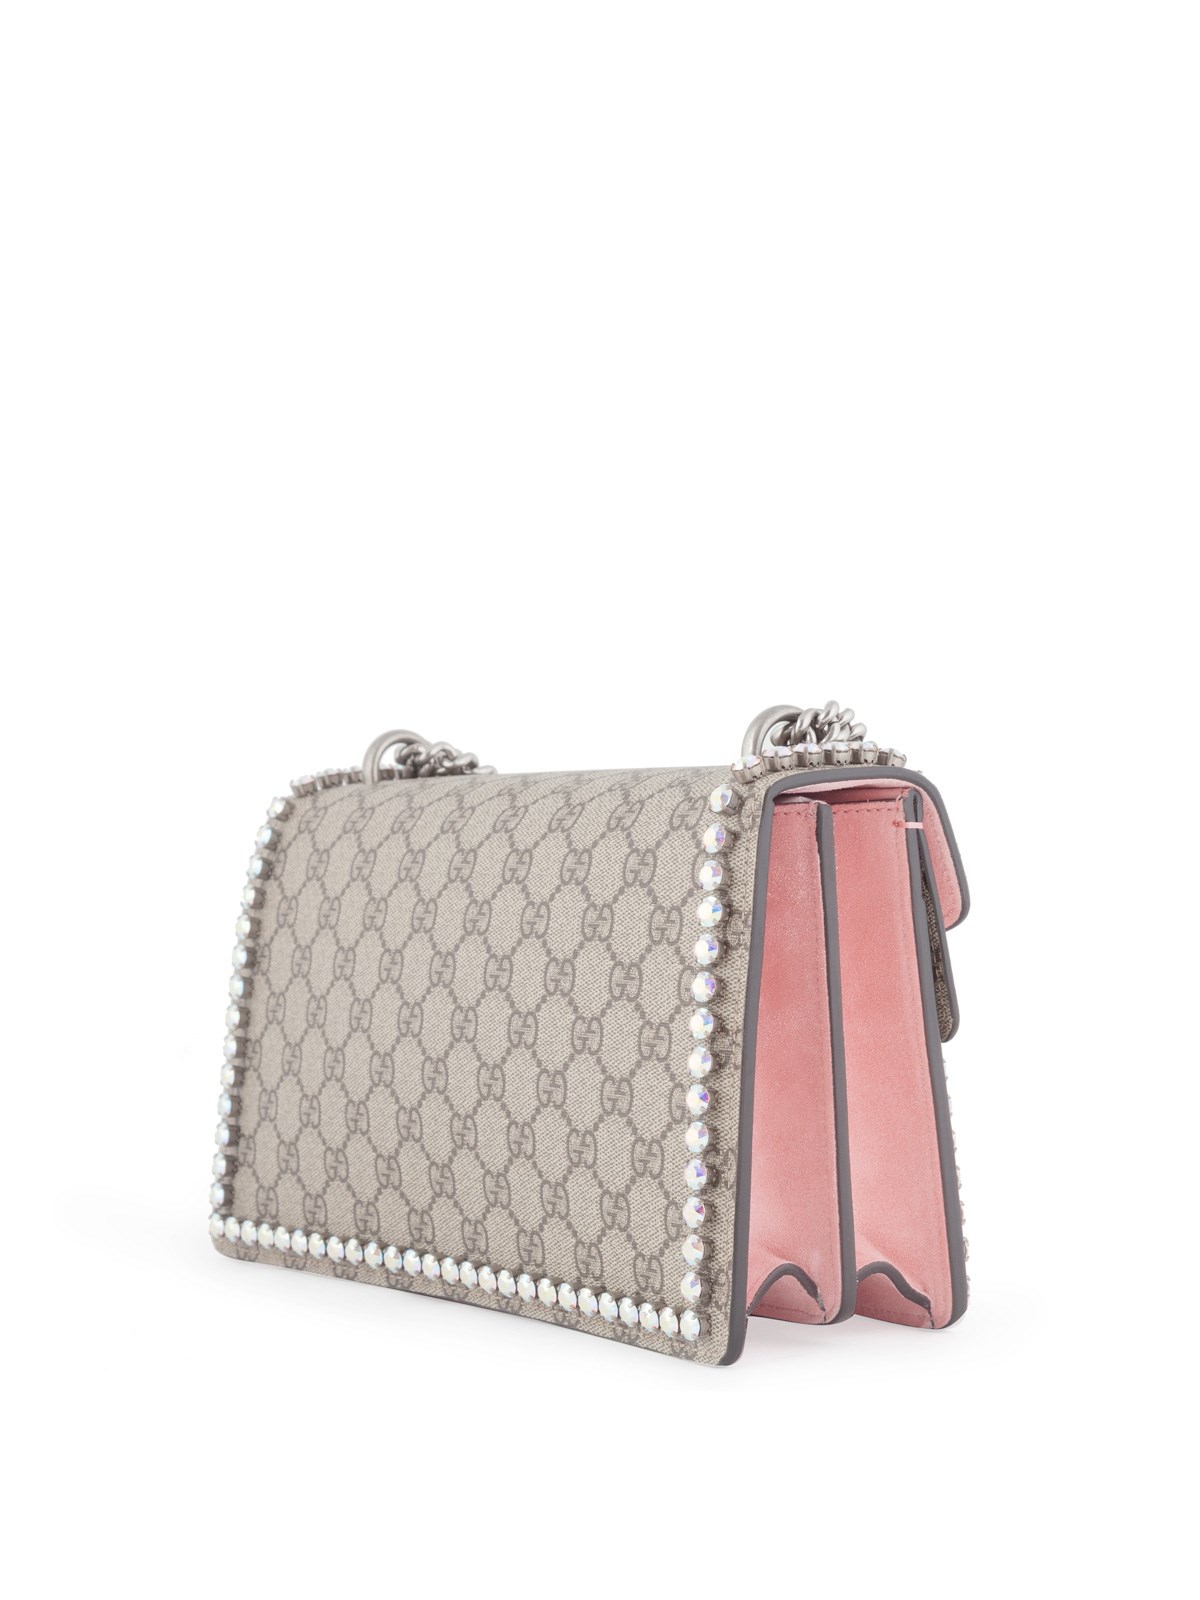 gucci DIONYSUS GG SUPREME SHOULDER BAG WITH CRYSTALS available on www.cinemas93.org - 20872